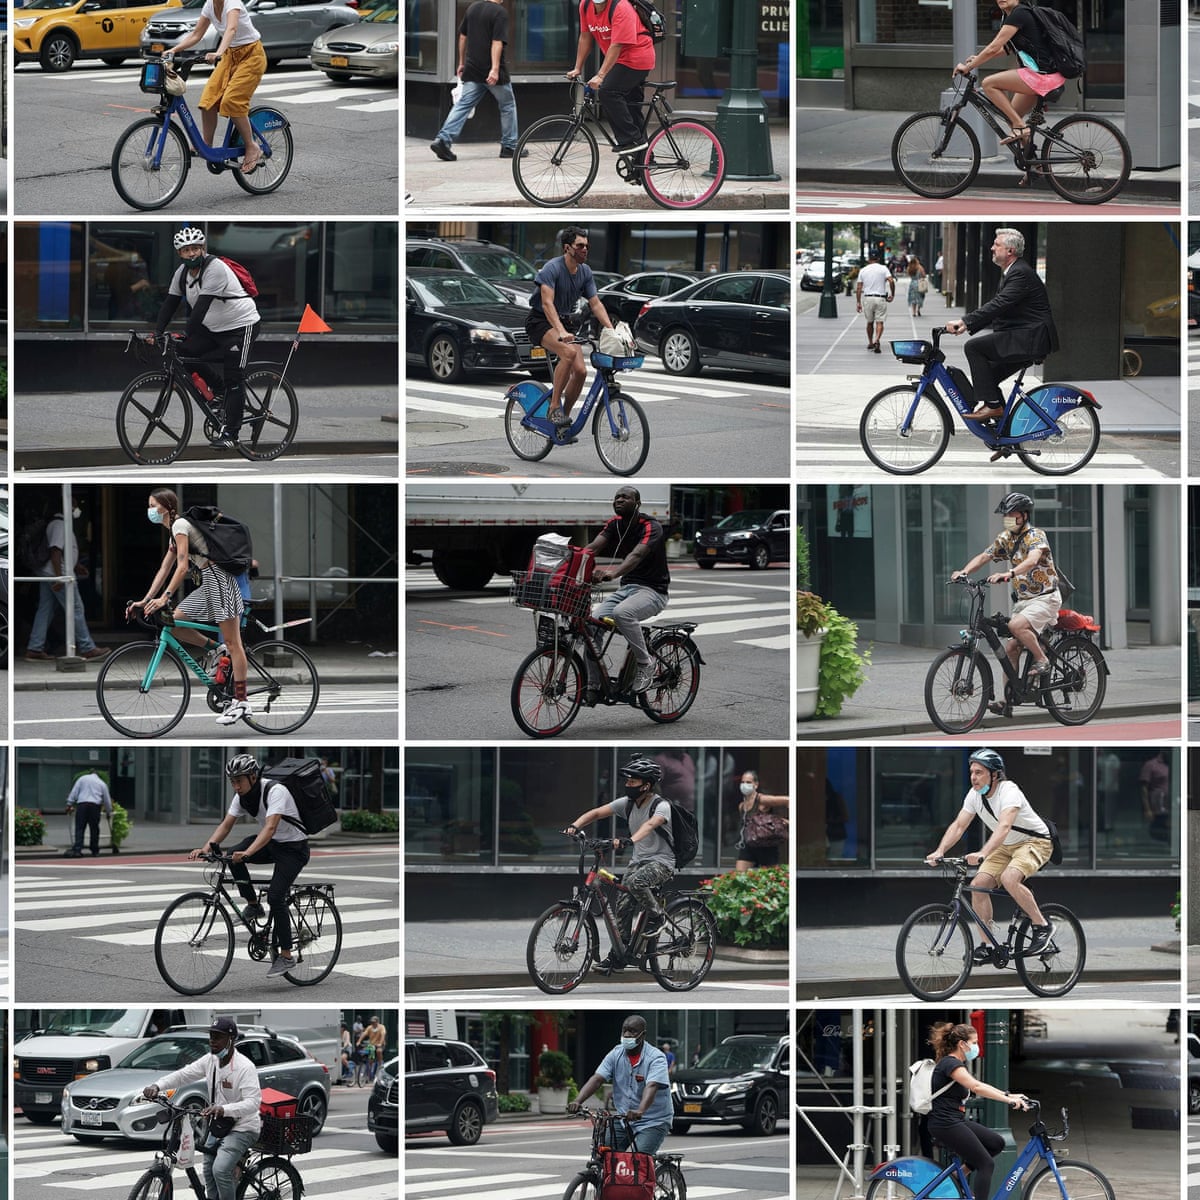 Too many close calls': why some US cyclists quit riding bikes on streets |  US news | The Guardian